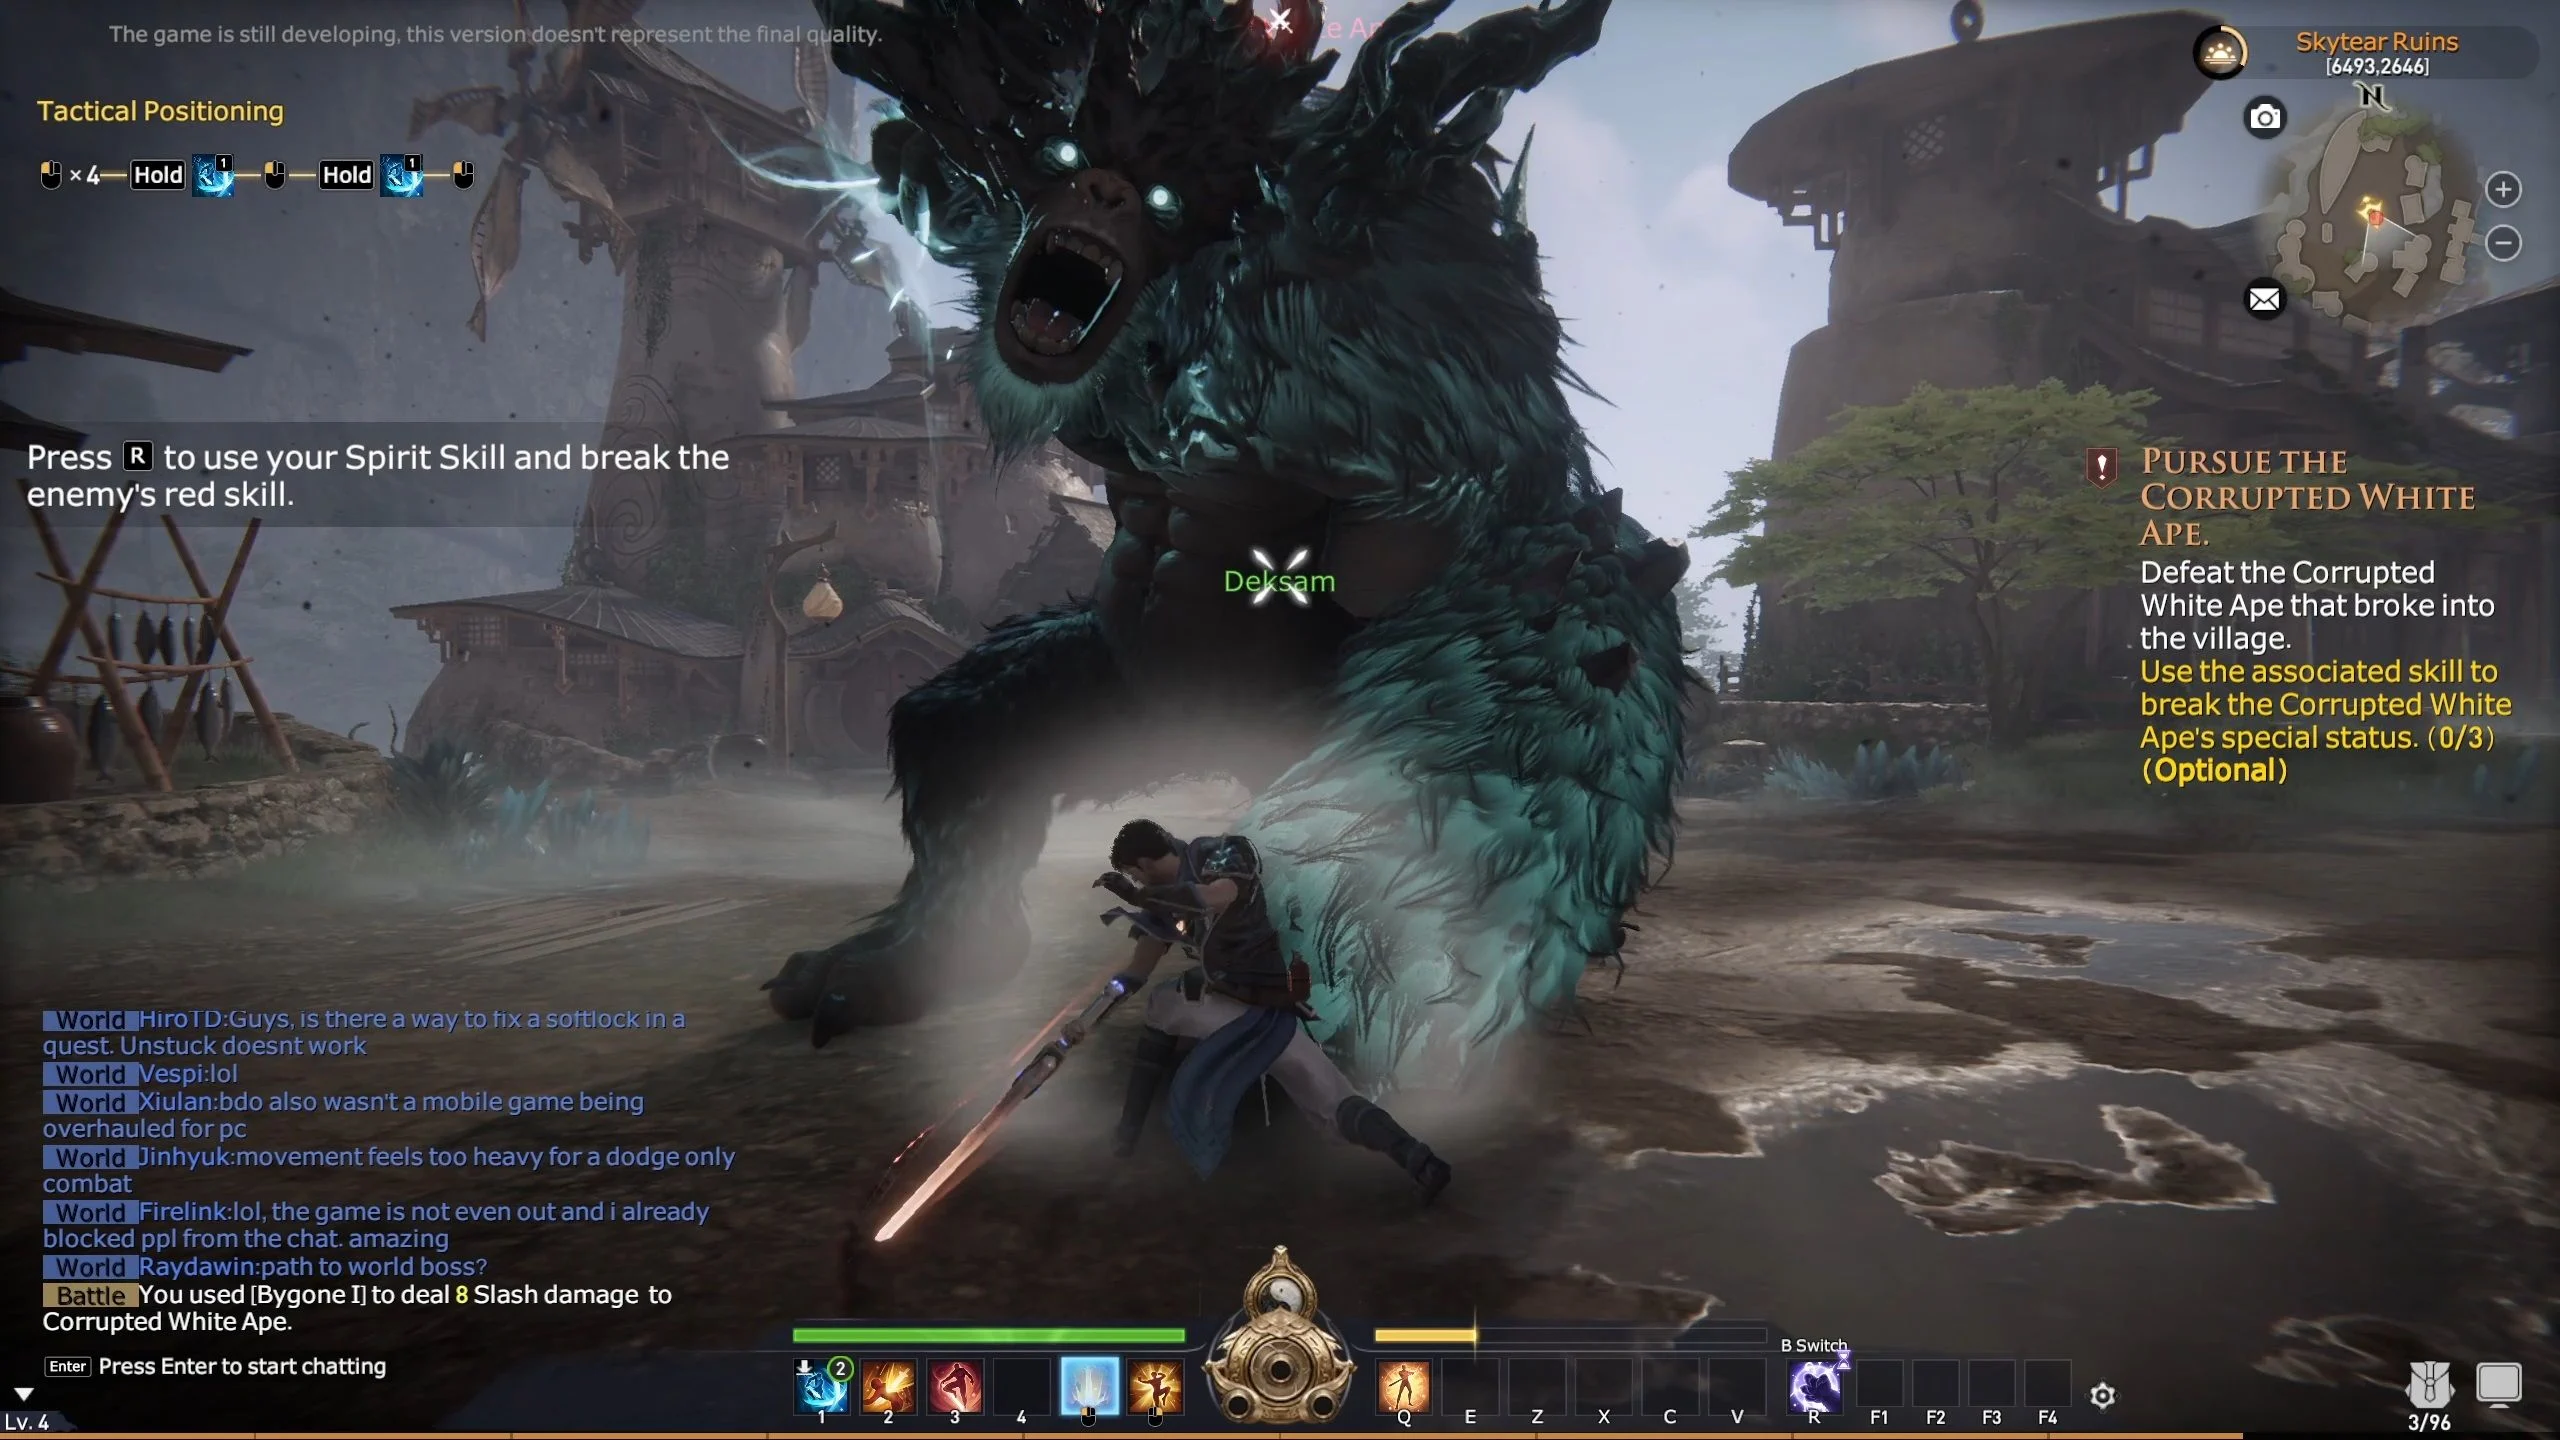 Short gameplay footage of MMORPG Perfect New World featuring in-game monsters